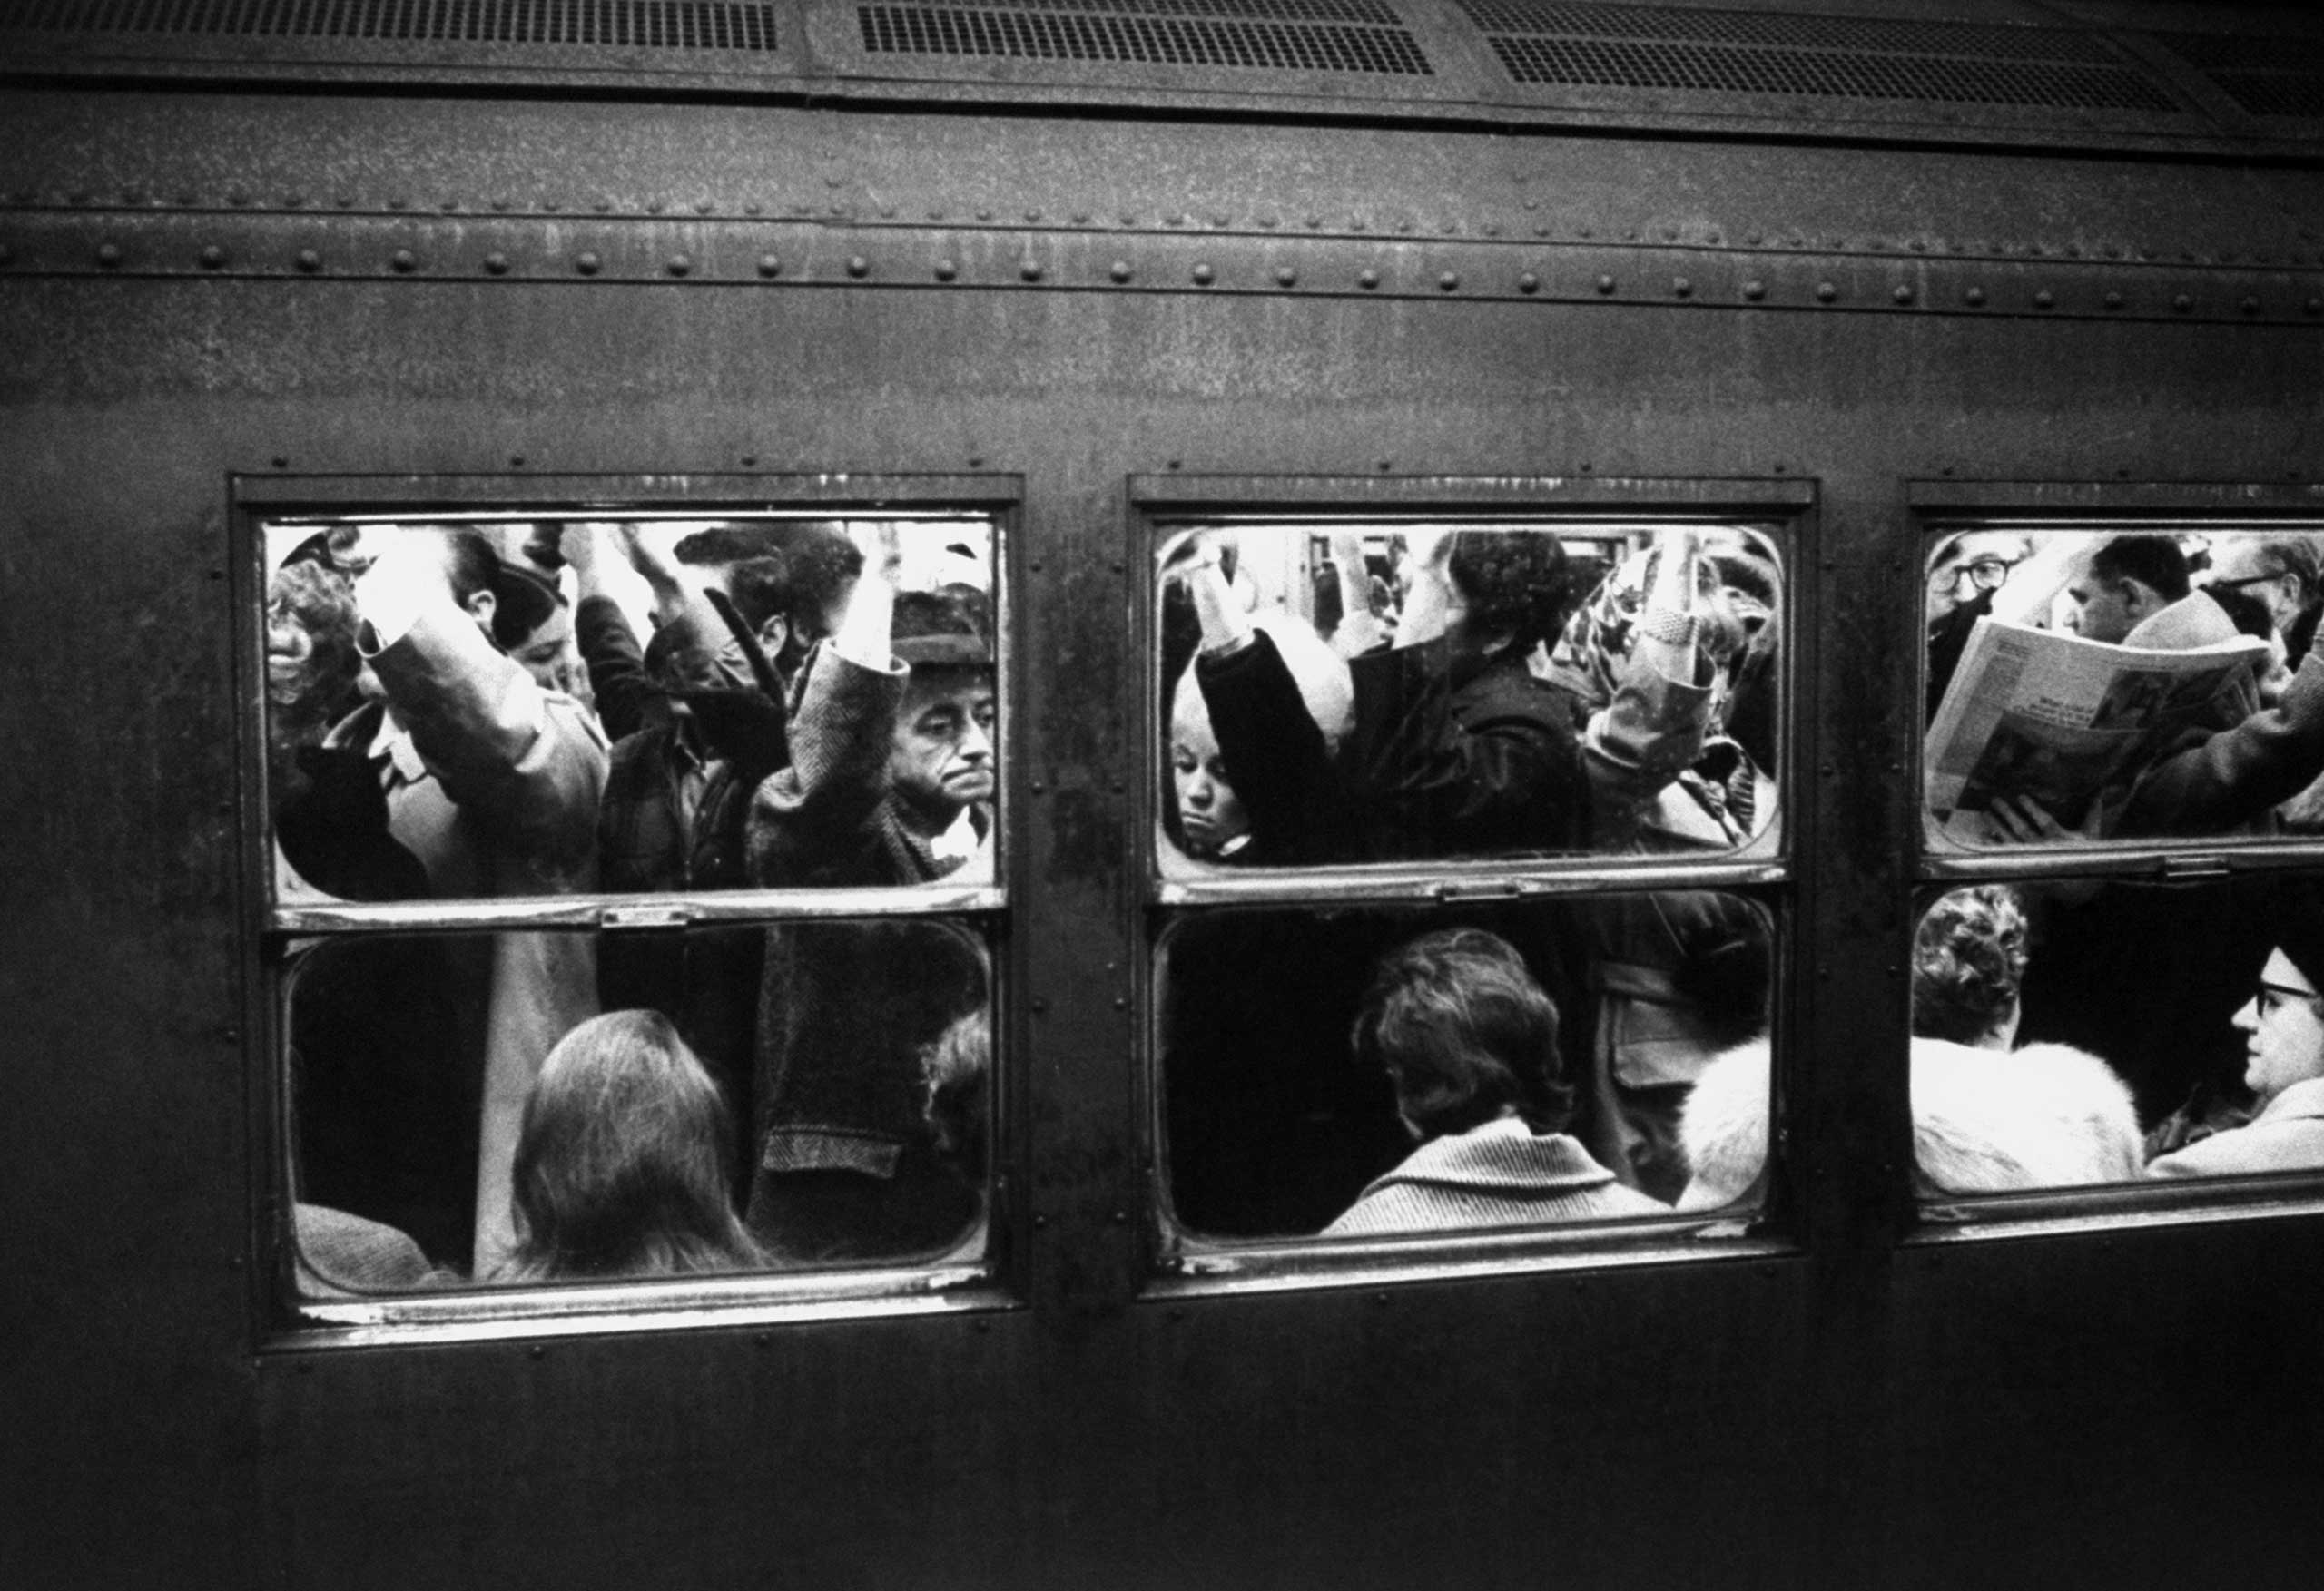 1970 | A crush of straphangers crowds a subway car in Manhattan. Originally published in the January 9, 1970, issue of LIFE.